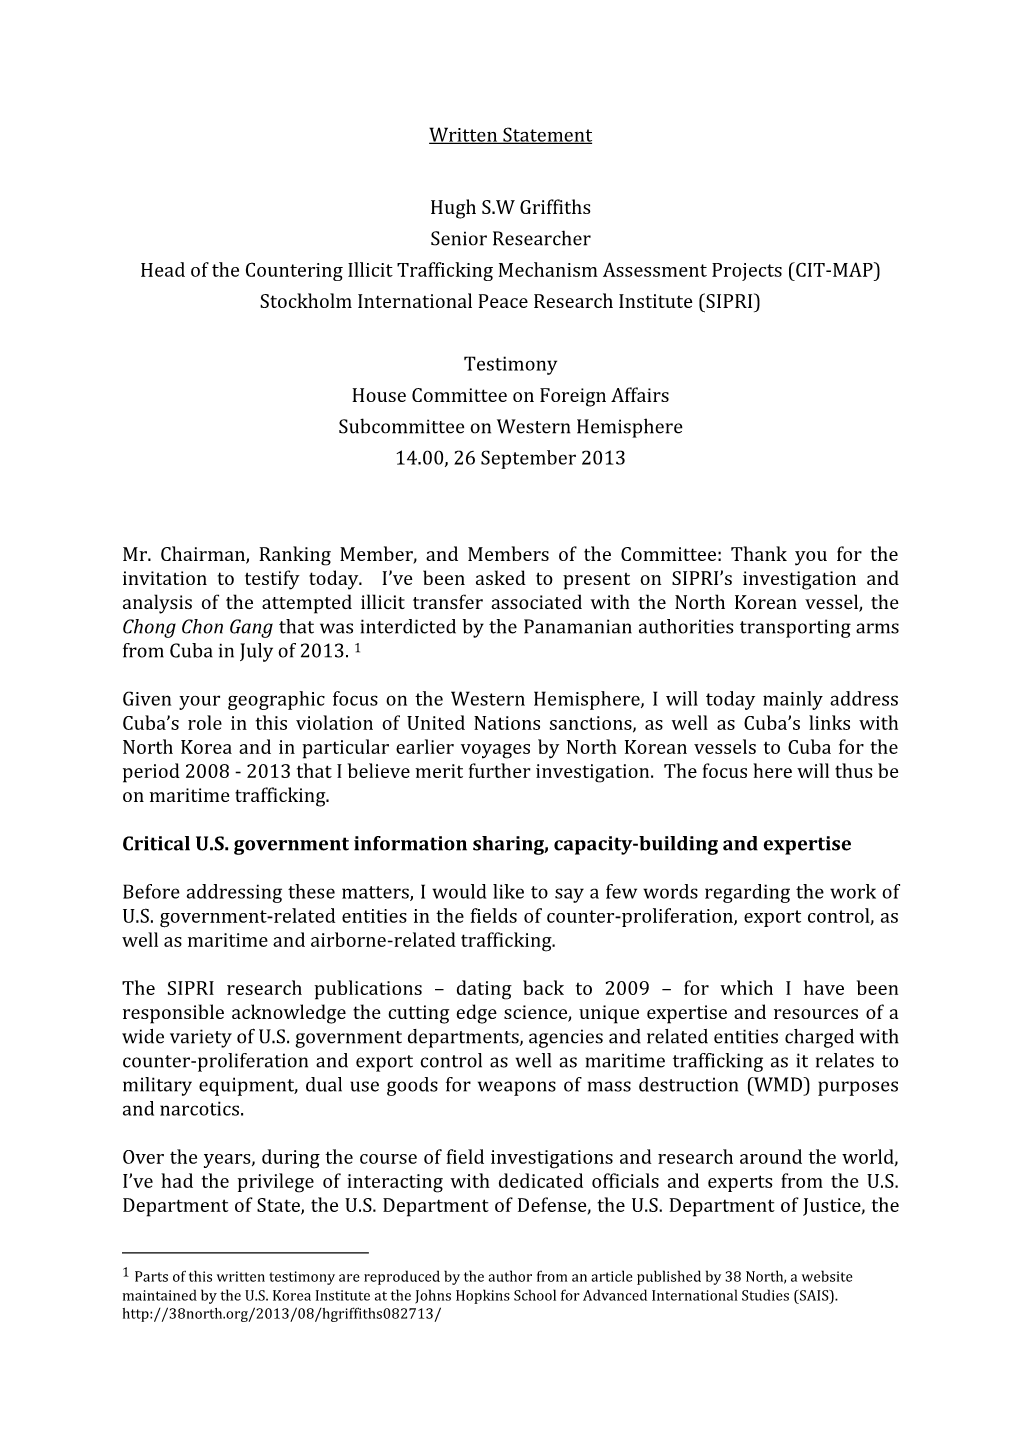 Written Statement Hugh S.W Griffiths Senior Researcher Head of the Countering Illicit Trafficking Mechanism Assessment Projects